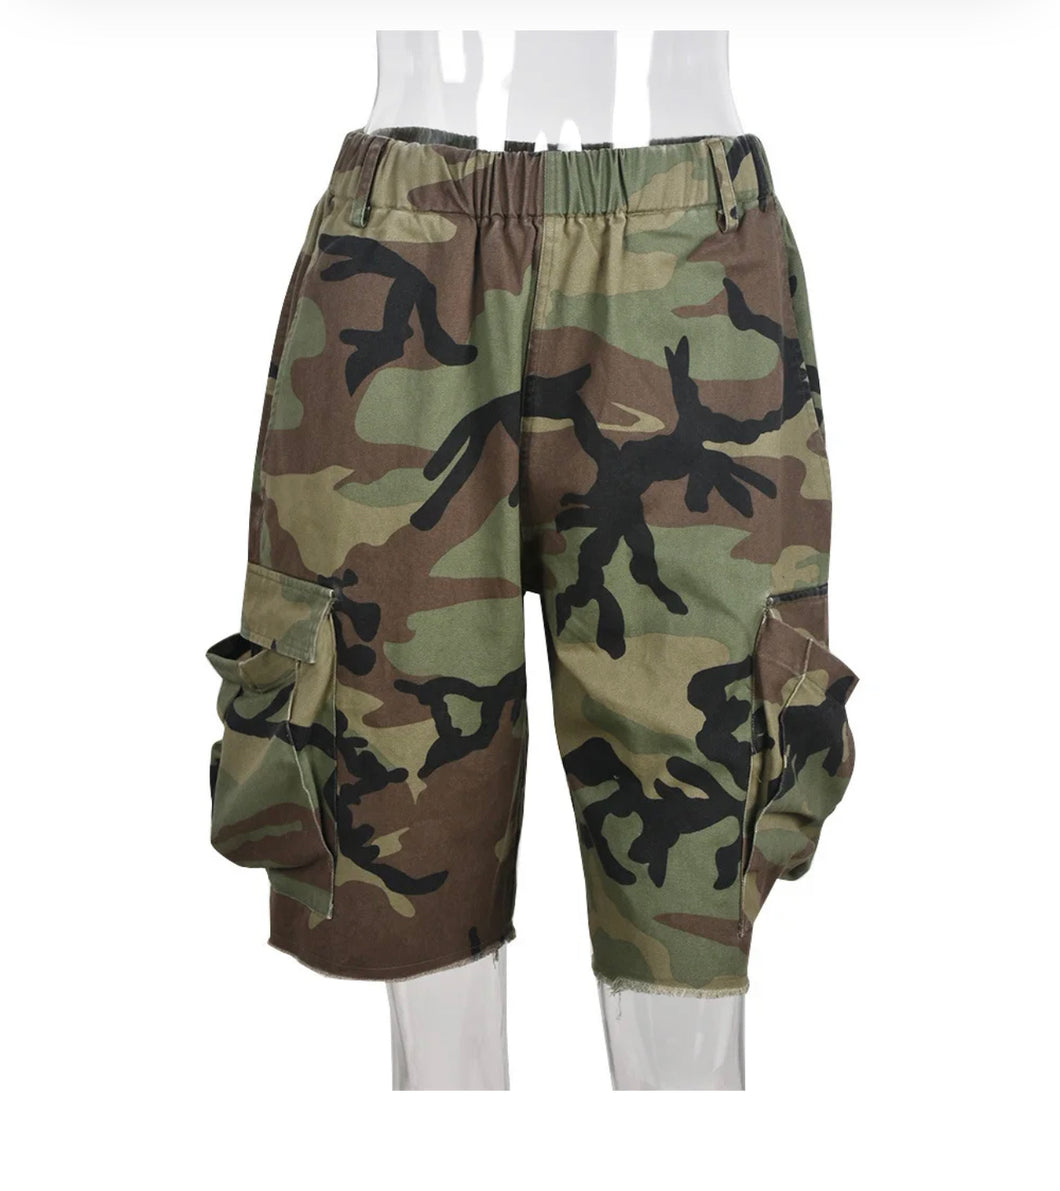 Camouflage Causal Cargo Shorts